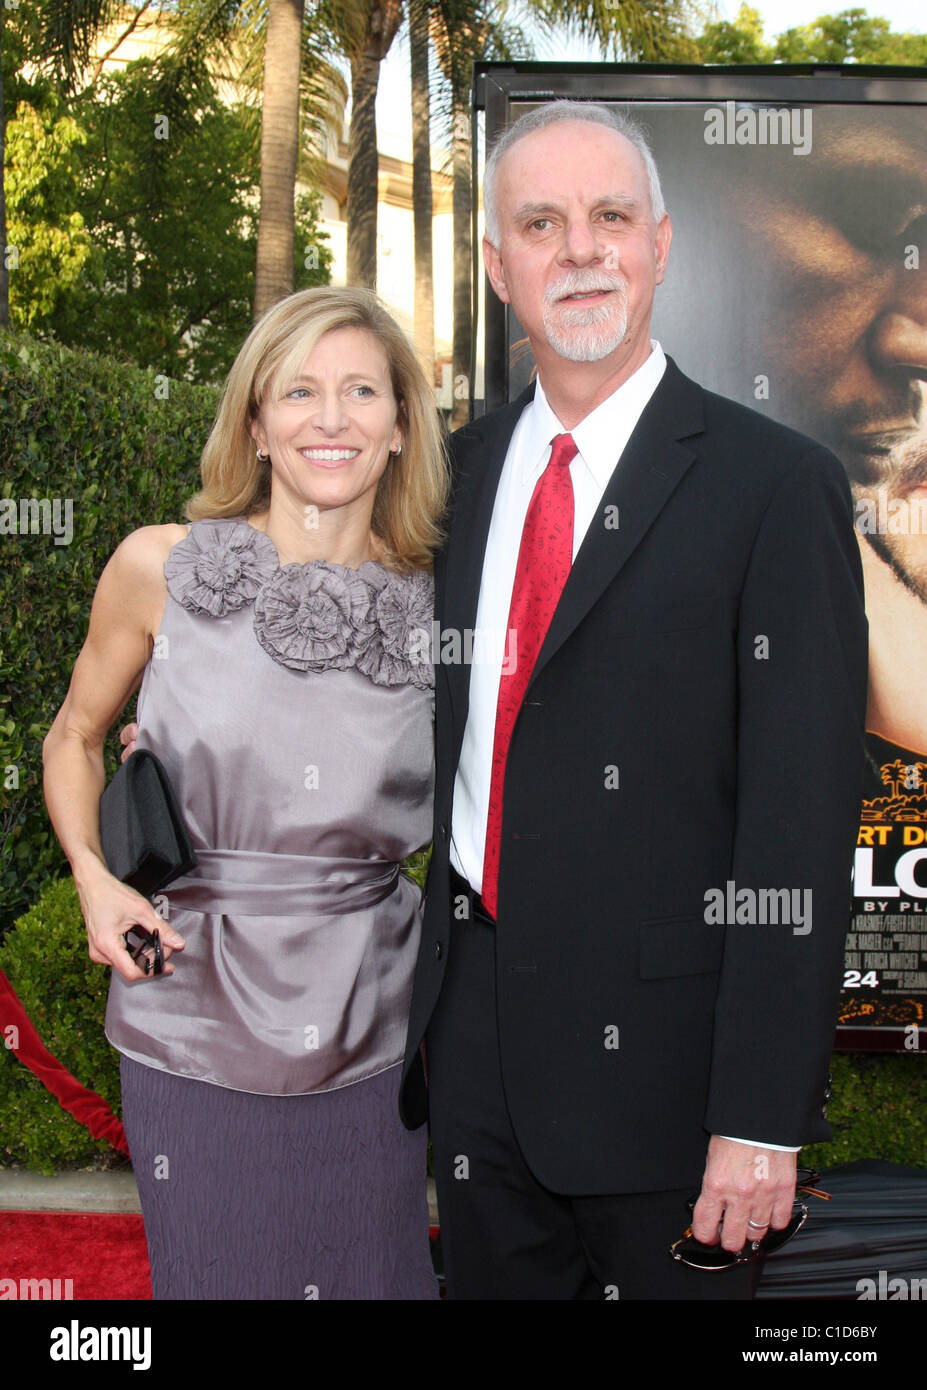 Apr 20, 2009 - Los Angeles, California, USA - STEVE LOPEZ and wife (One of  the Charactors the Film is based on) at 'The Soloist' Los Angeles Premiere  held at Paramount Studios